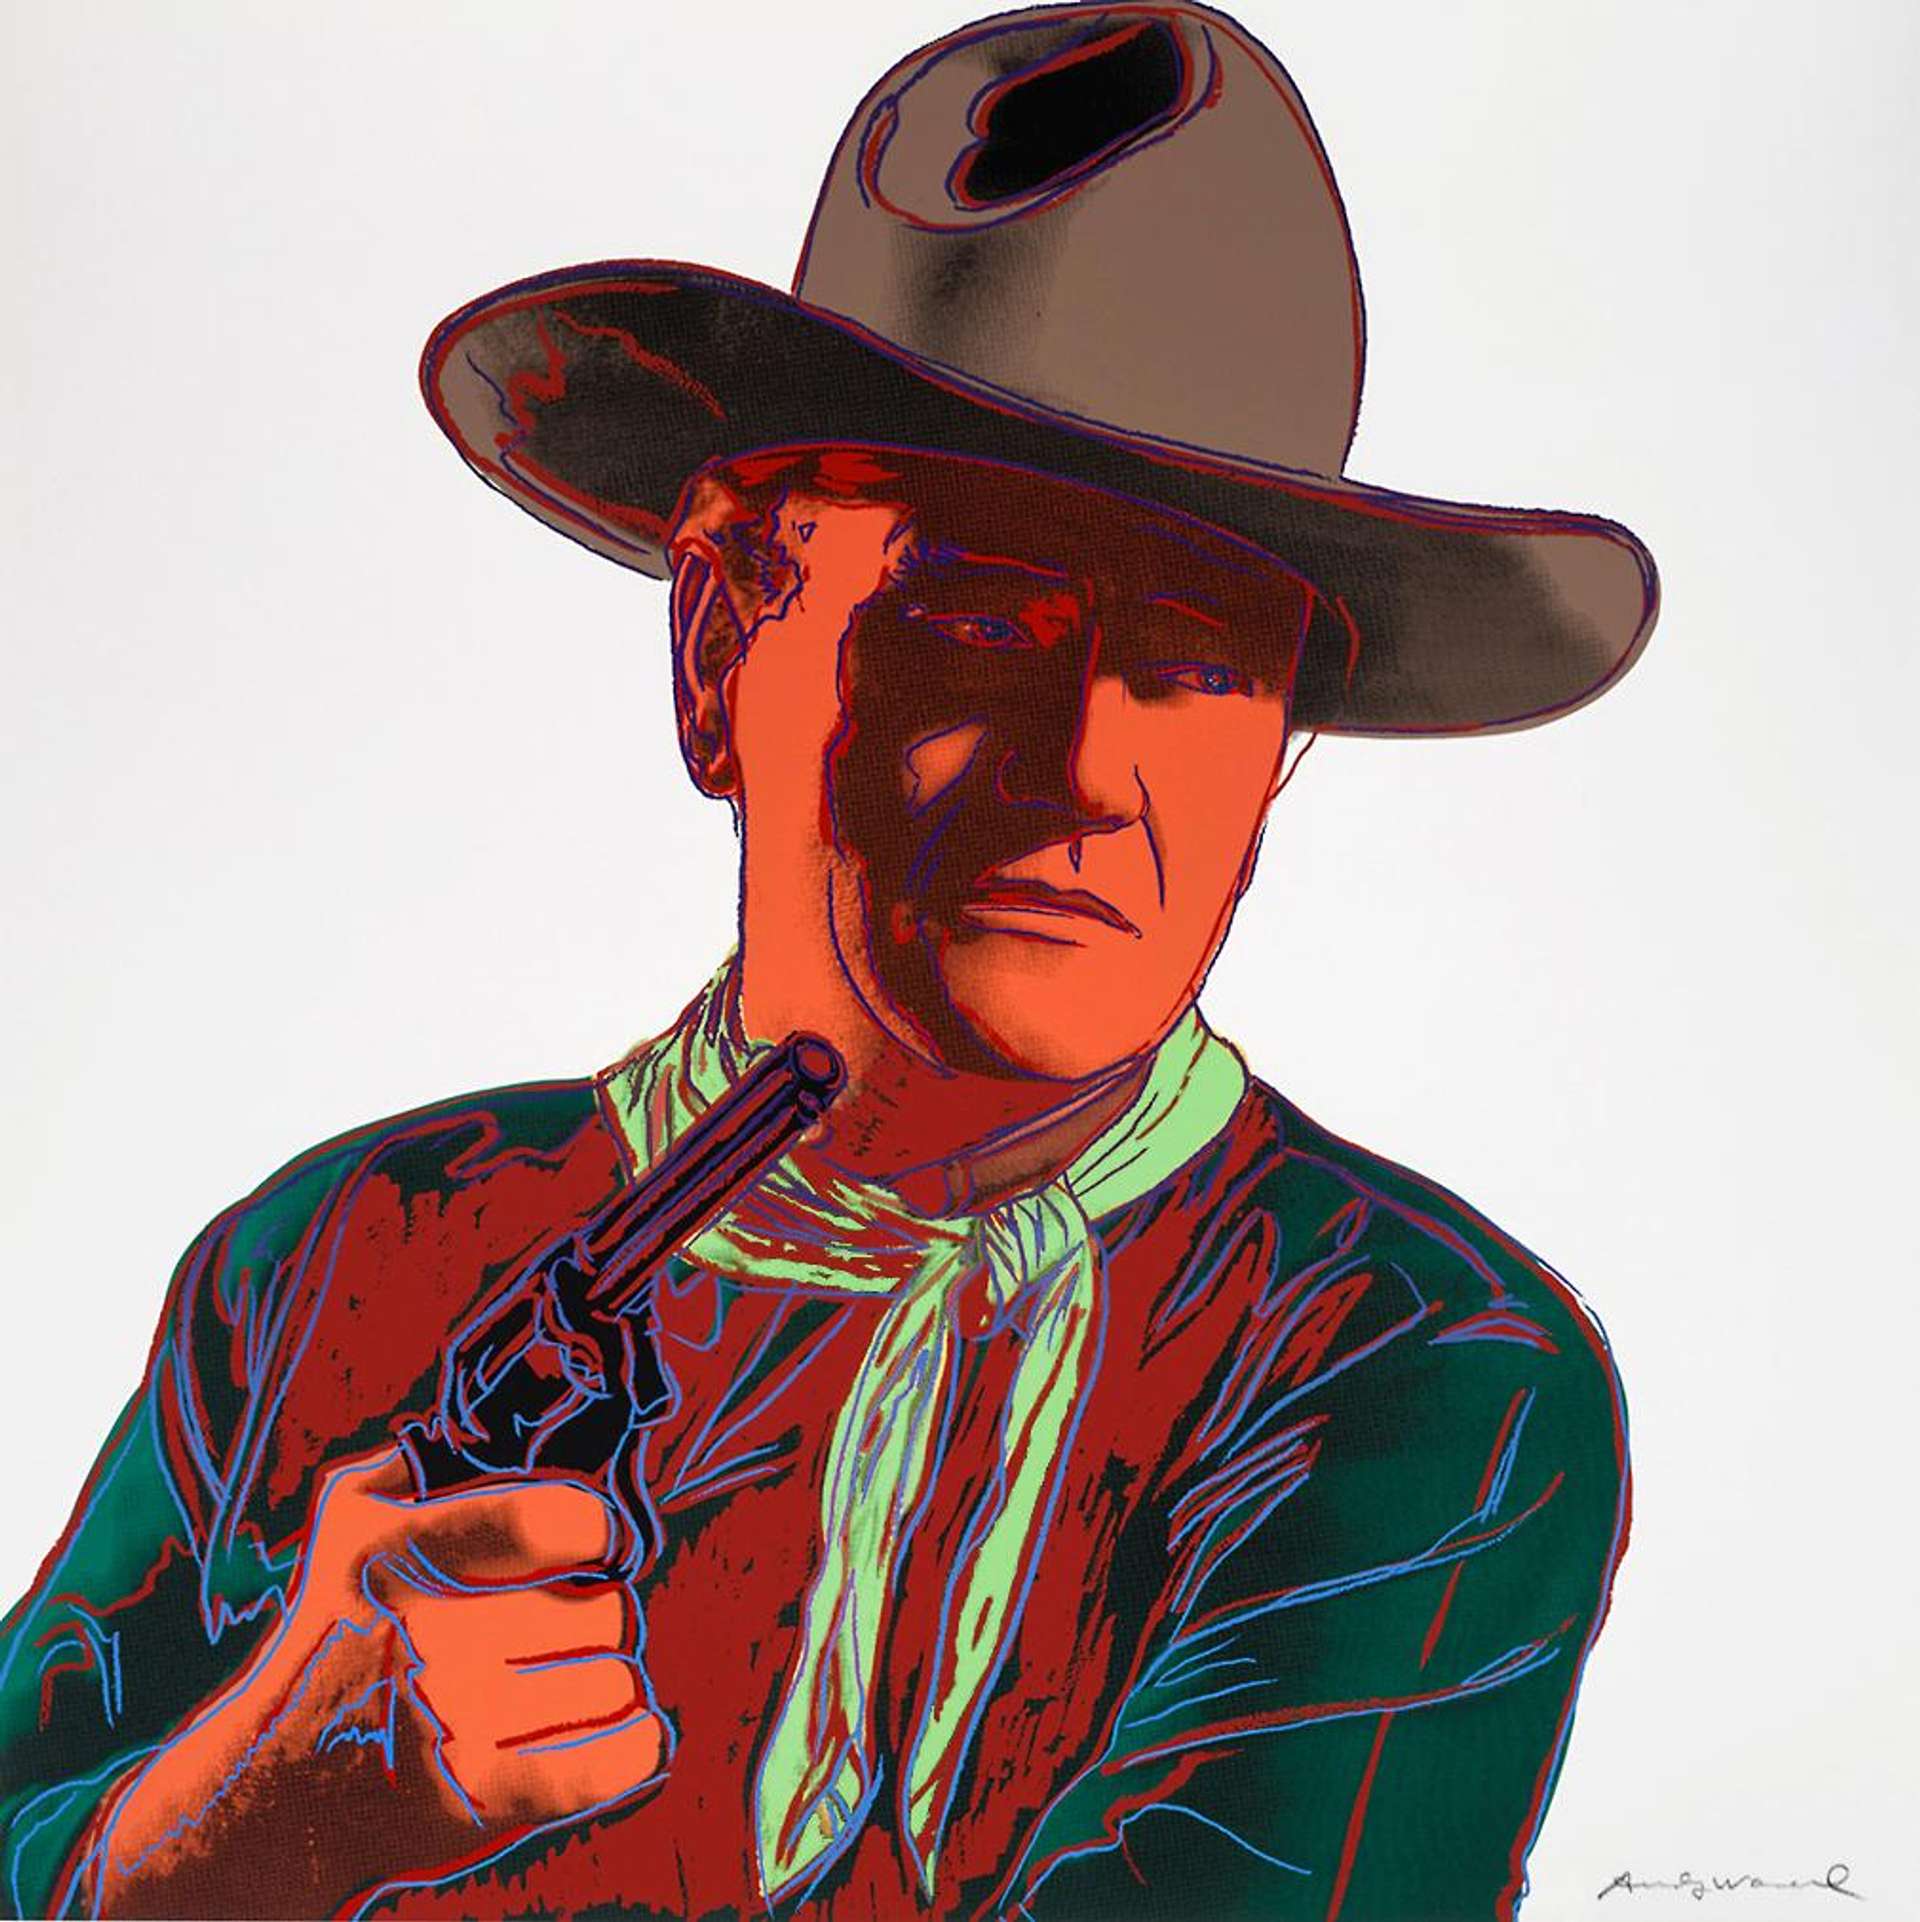 A screenprint by Andy Warhol depicting John Wayne in a cowboy costume with bright orange skin, set against a white background.